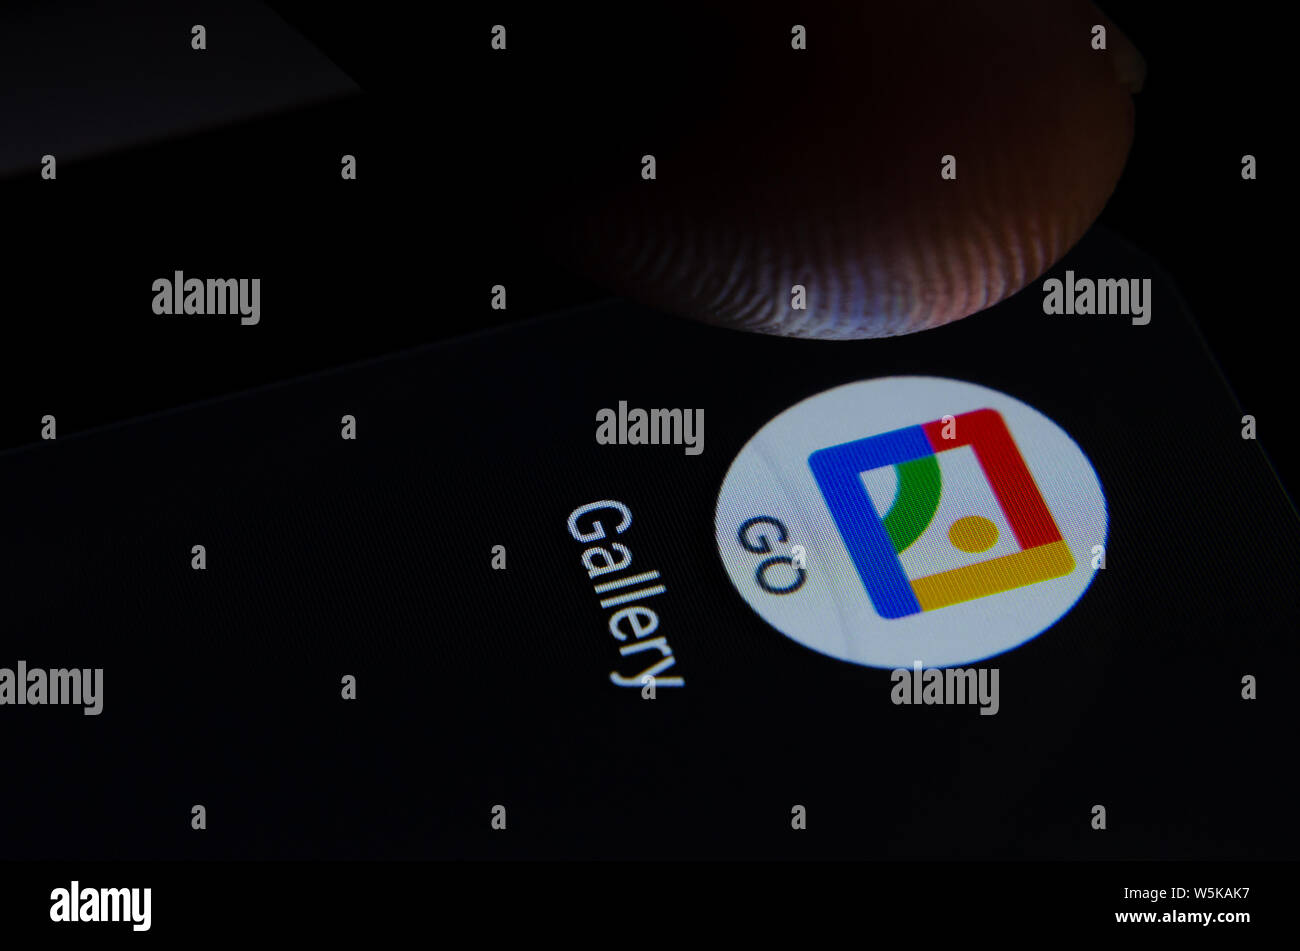 Google Galllery GO app icon on the smartphone screen with visible pixels and the finger about to launch it. Stock Photo